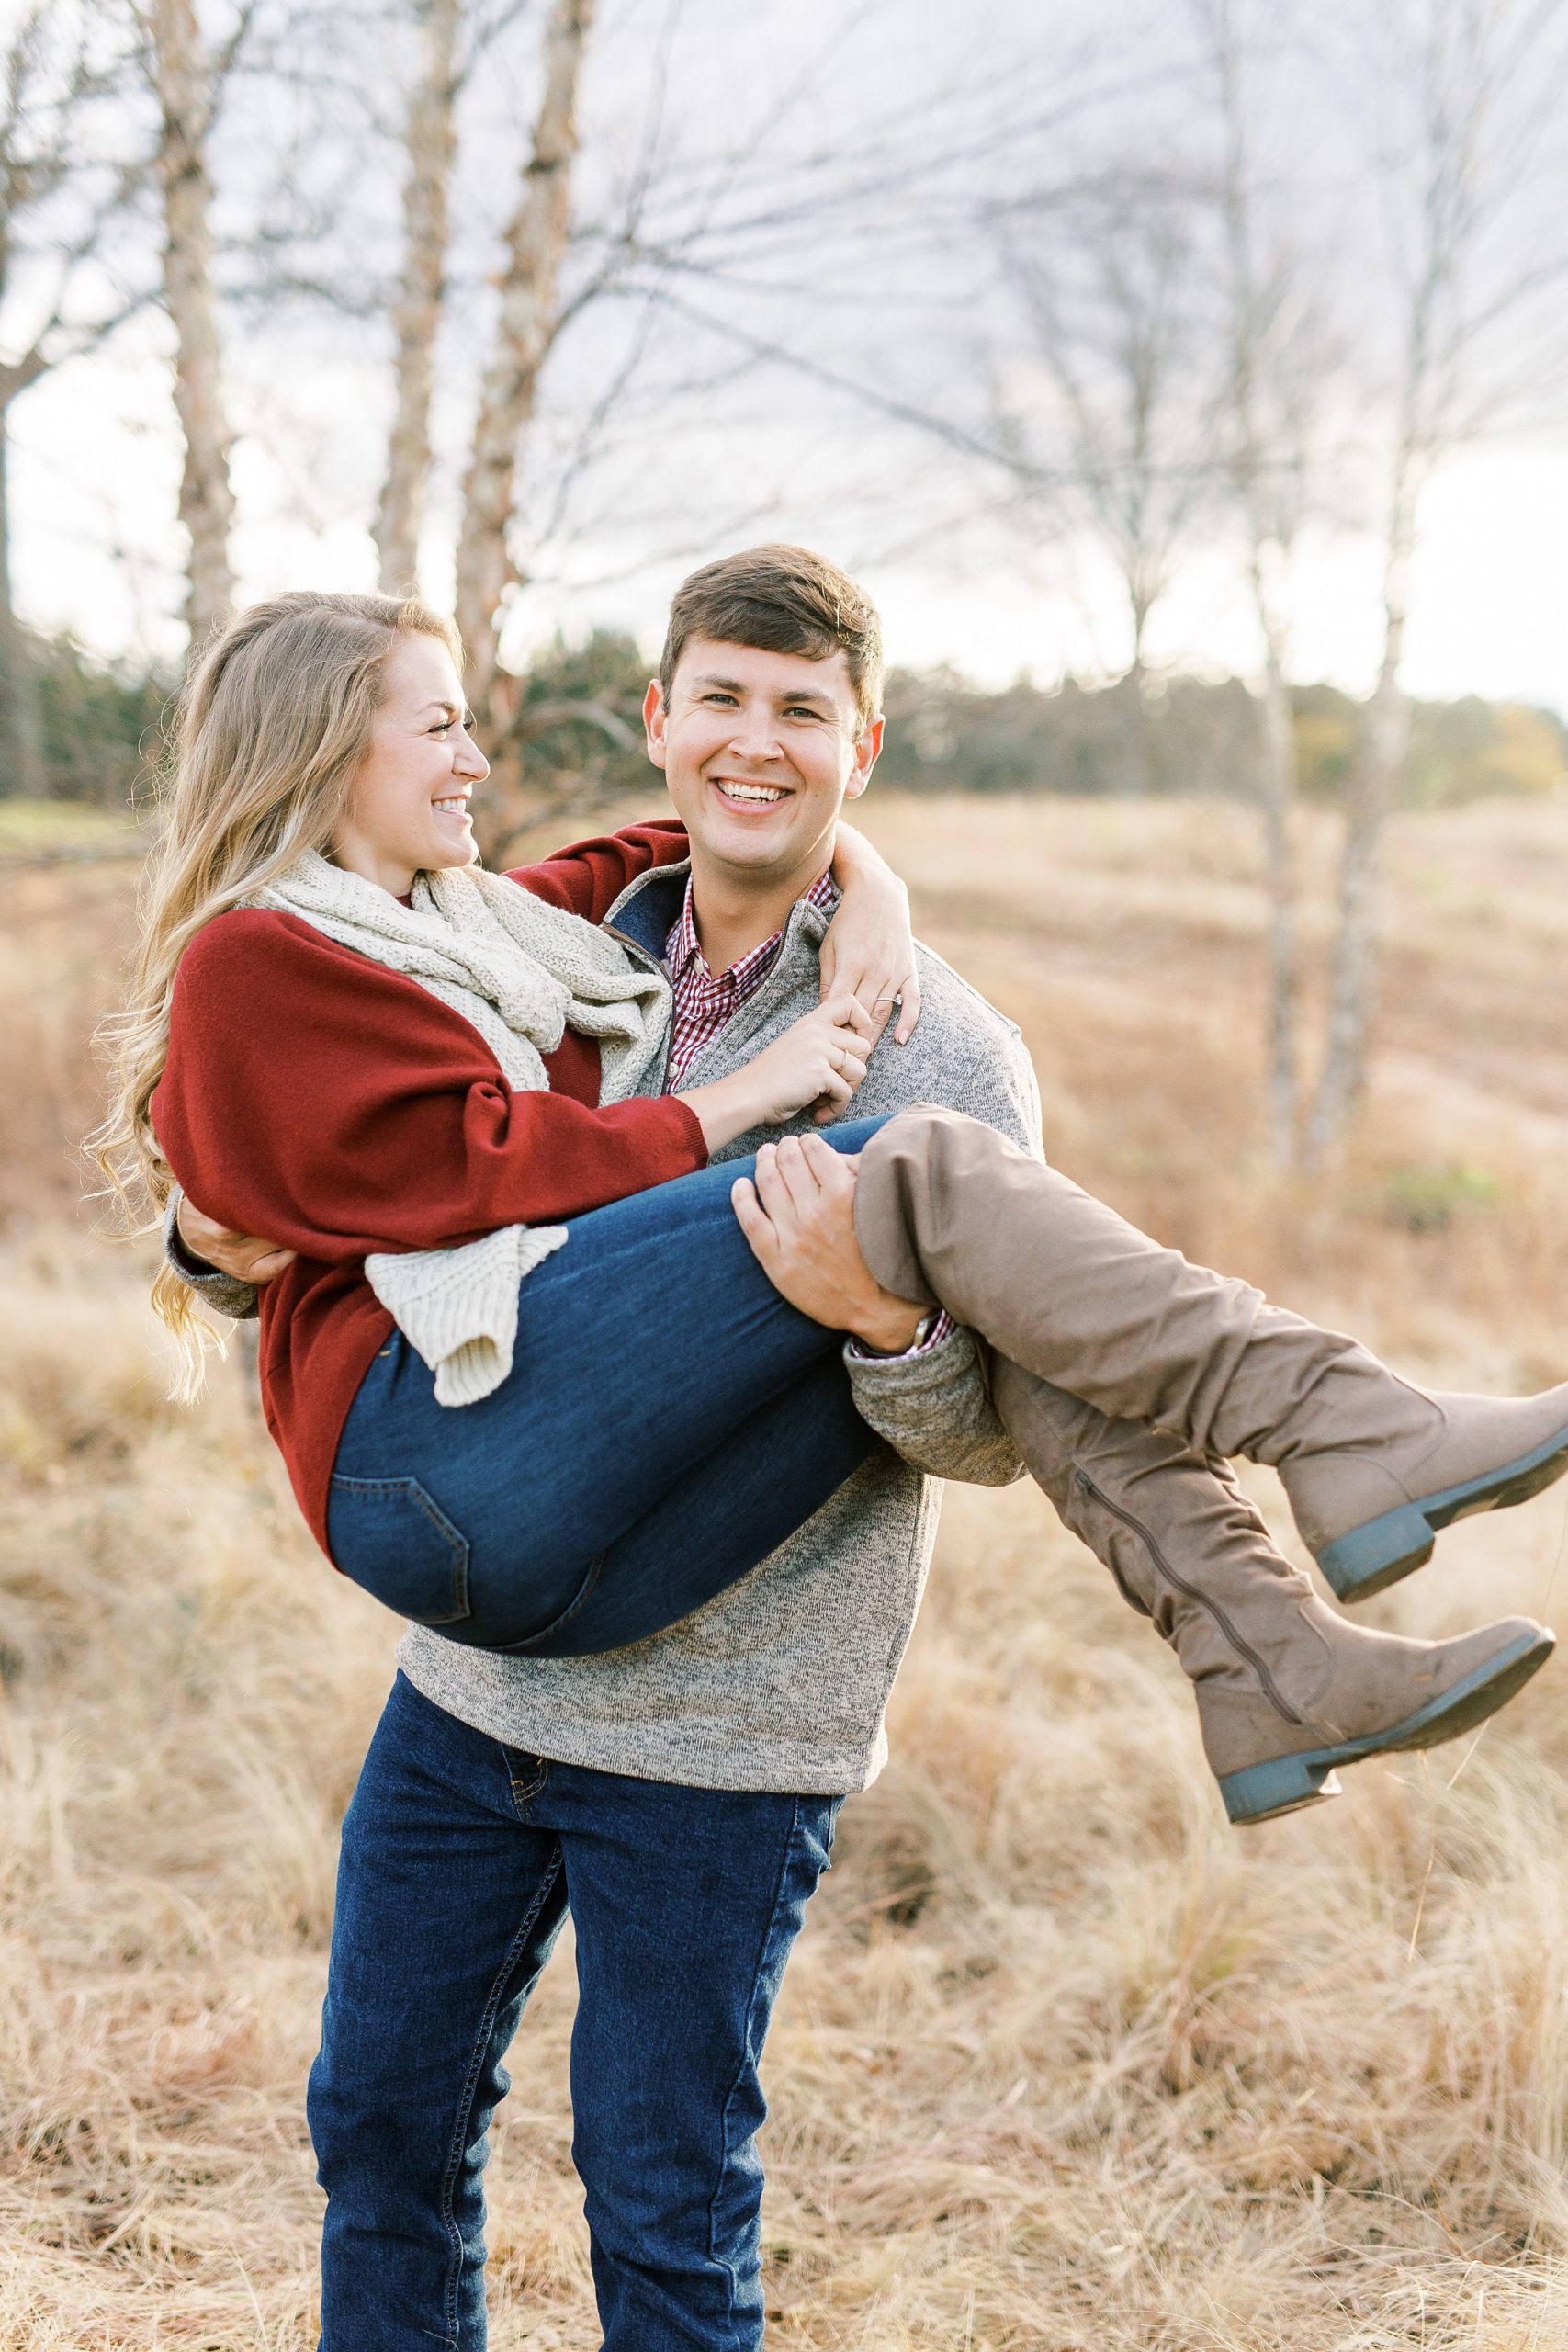 groom lifts bride-to-be in field during fall engagement photos